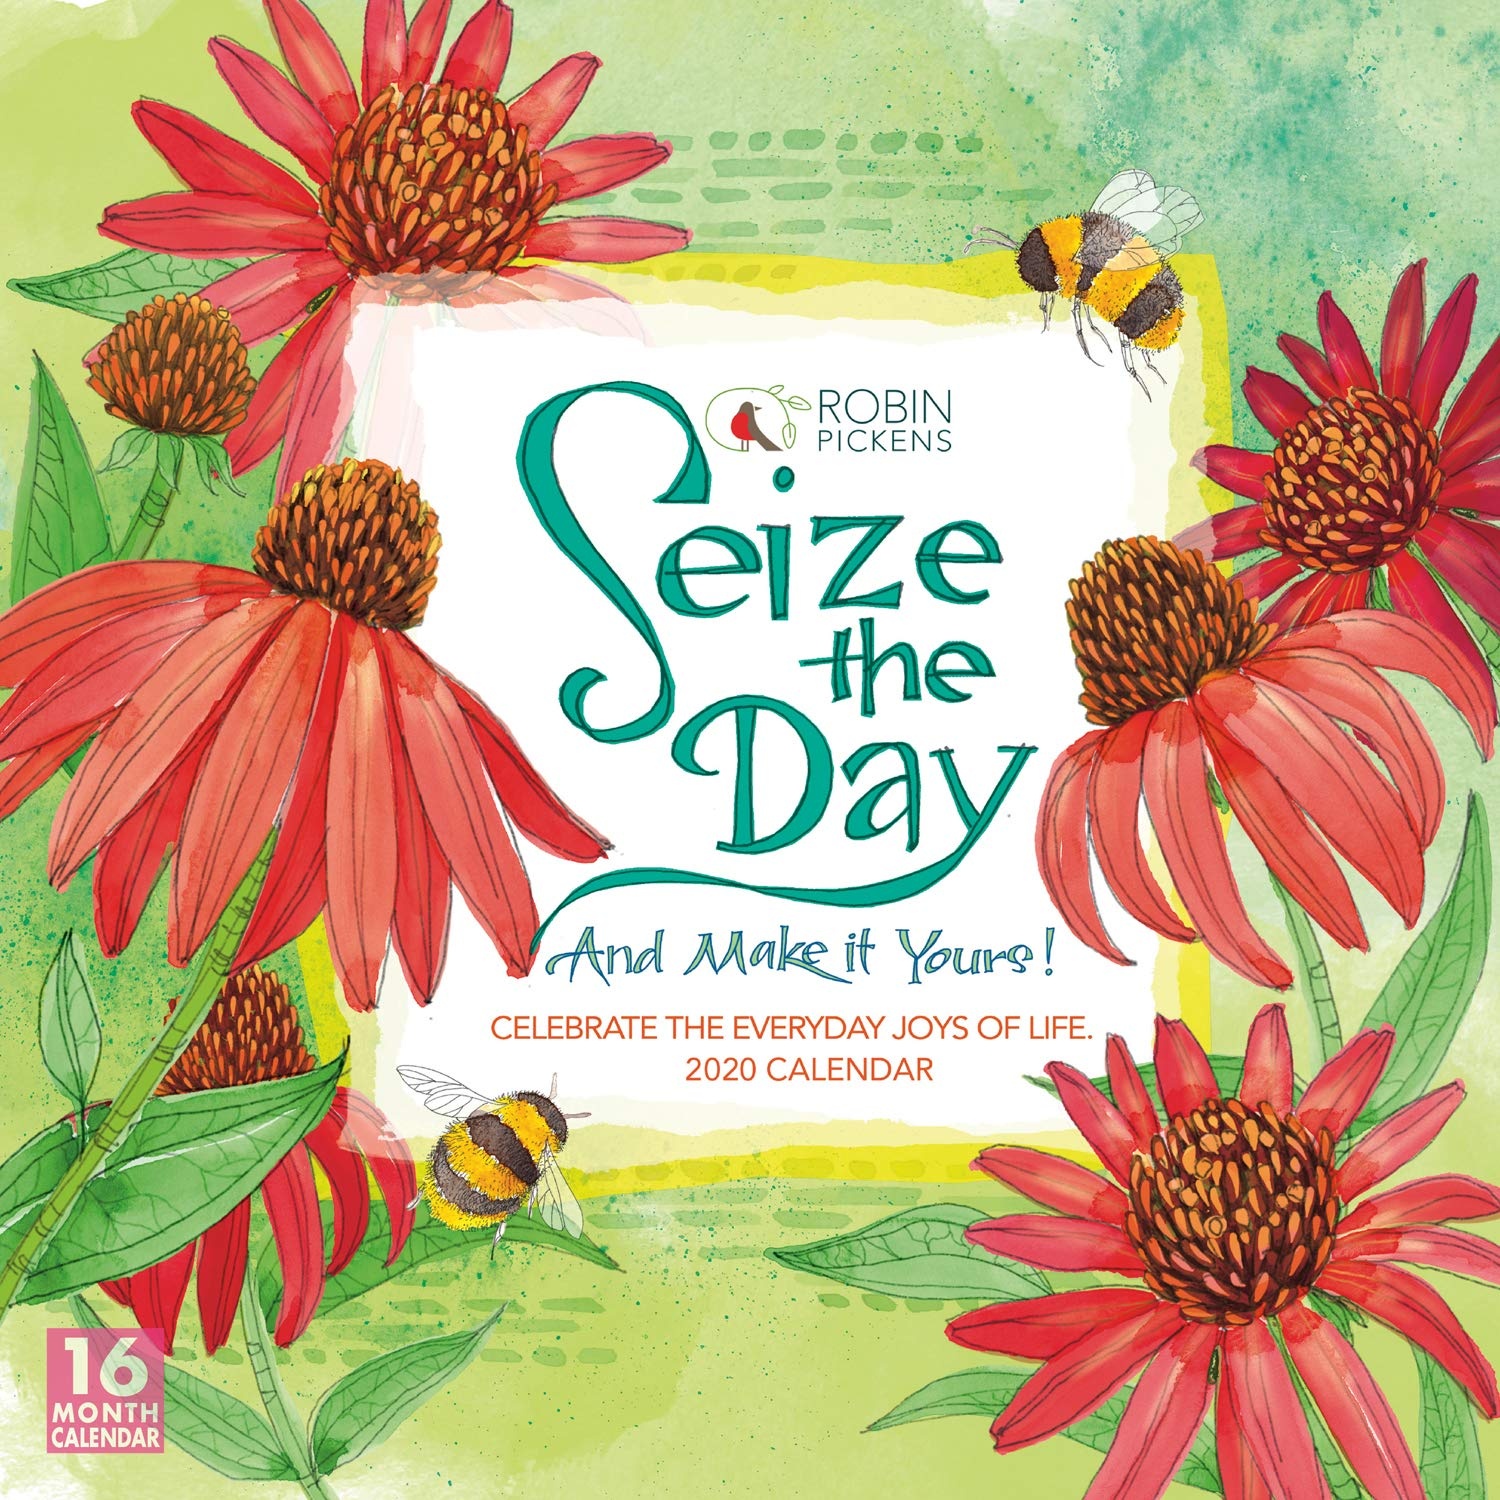 Seize the Day and Make It Yours 2020 Calendar: Celebrate the Everyday Joys of Life